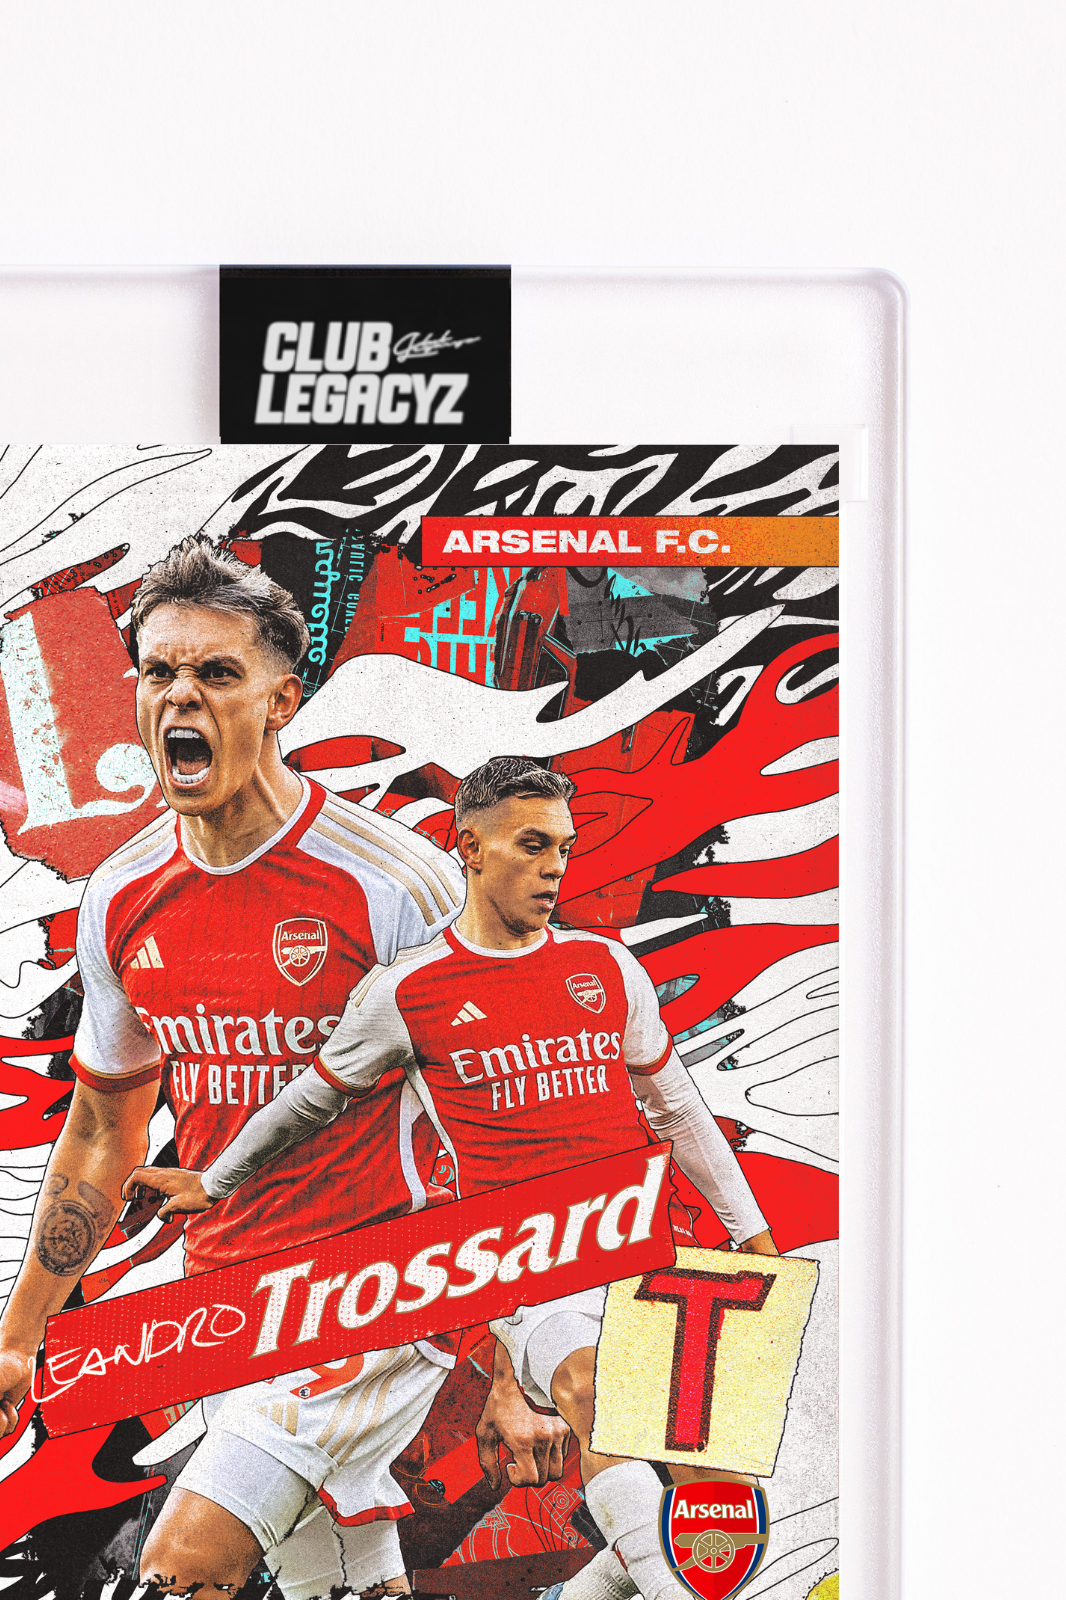 Arsenal FC - Leandro Trossard Icon limited to 50